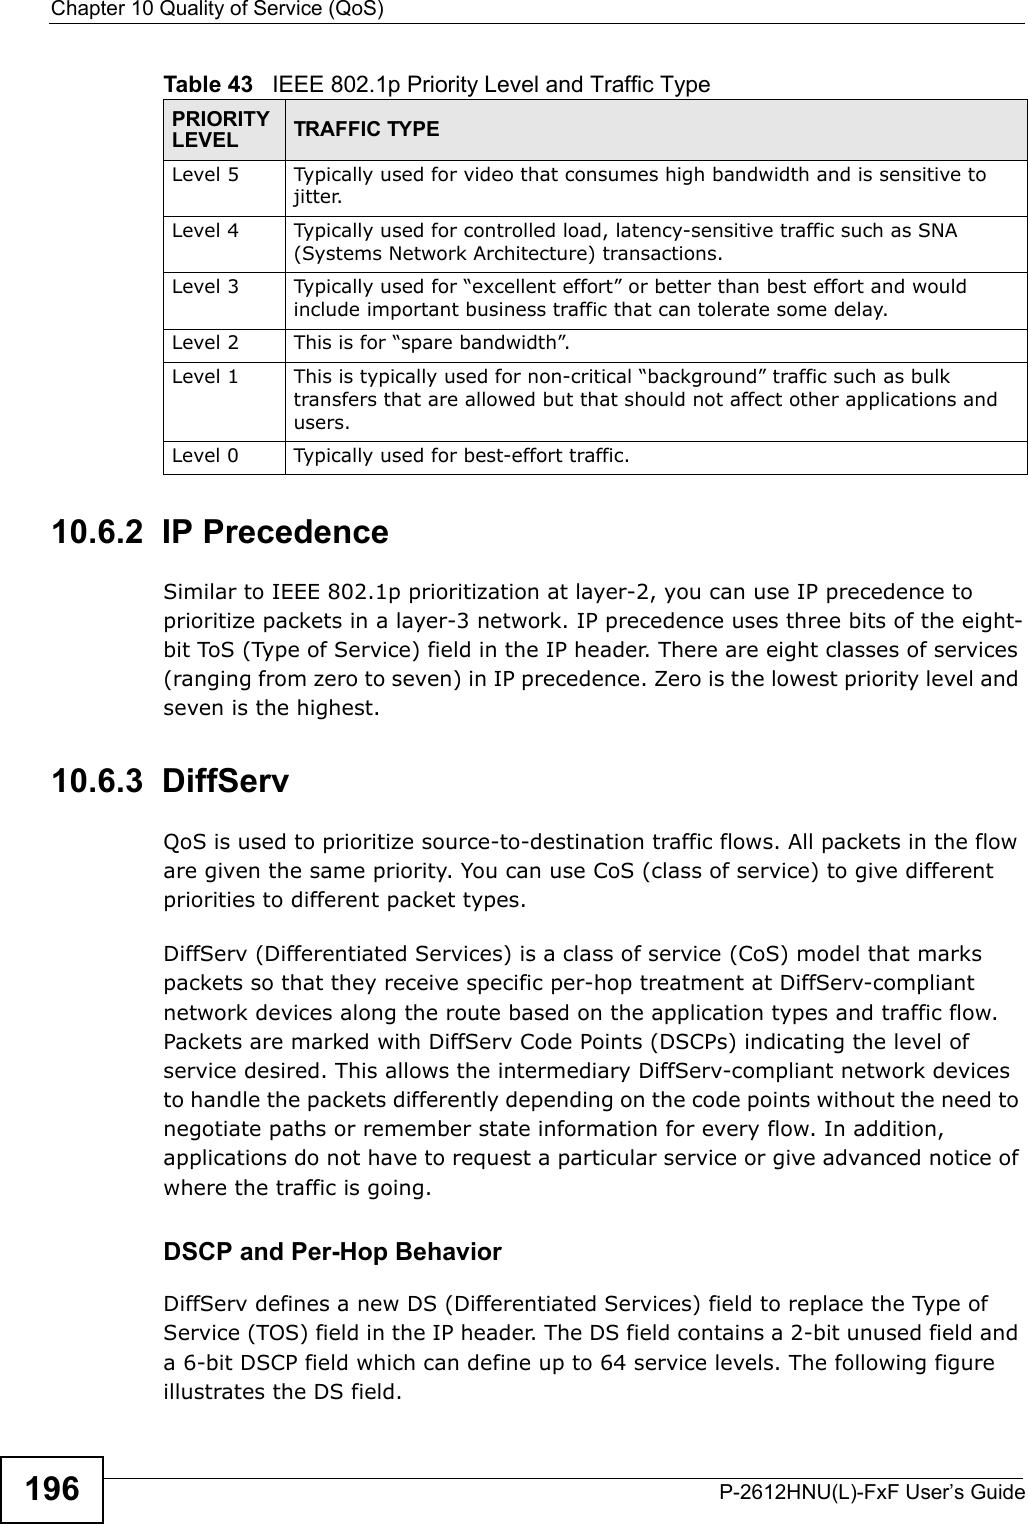 Chapter 10 Quality of Service (QoS)P-2612HNU(L)-FxF User’s Guide19610.6.2  IP PrecedenceSimilar to IEEE 802.1p prioritization at layer-2, you can use IP precedence to prioritize packets in a layer-3 network. IP precedence uses three bits of the eight-bit ToS (Type of Service) field in the IP header. There are eight classes of services (ranging from zero to seven) in IP precedence. Zero is the lowest priority level and seven is the highest.10.6.3  DiffServ QoS is used to prioritize source-to-destination traffic flows. All packets in the flow are given the same priority. You can use CoS (class of service) to give different priorities to different packet types.DiffServ (Differentiated Services) is a class of service (CoS) model that markspackets so that they receive specific per-hop treatment at DiffServ-compliant network devices along the route based on the application types and traffic flow.Packets are marked with DiffServ Code Points (DSCPs) indicating the level of service desired. This allows the intermediary DiffServ-compliant network devicesto handle the packets differently depending on the code points without the need tonegotiate paths or remember state information for every flow. In addition, applications do not have to request a particular service or give advanced notice of where the traffic is going. DSCP and Per-Hop Behavior DiffServ defines a new DS (Differentiated Services) field to replace the Type of Service (TOS) field in the IP header. The DS field contains a 2-bit unused field and a 6-bit DSCP field which can define up to 64 service levels. The following figure illustrates the DS field. Level 5 Typically used for video that consumes high bandwidth and is sensitive to jitter.Level 4 Typically used for controlled load, latency-sensitive traffic such as SNA (Systems Network Architecture) transactions.Level 3 Typically used for “excellent effort” or better than best effort and would include important business traffic that can tolerate some delay.Level 2 This is for “spare bandwidth”. Level 1 This is typically used for non-critical “background” traffic such as bulk transfers that are allowed but that should not affect other applications and users.Level 0 Typically used for best-effort traffic.Table 43   IEEE 802.1p Priority Level and Traffic TypePRIORITY LEVEL TRAFFIC TYPE